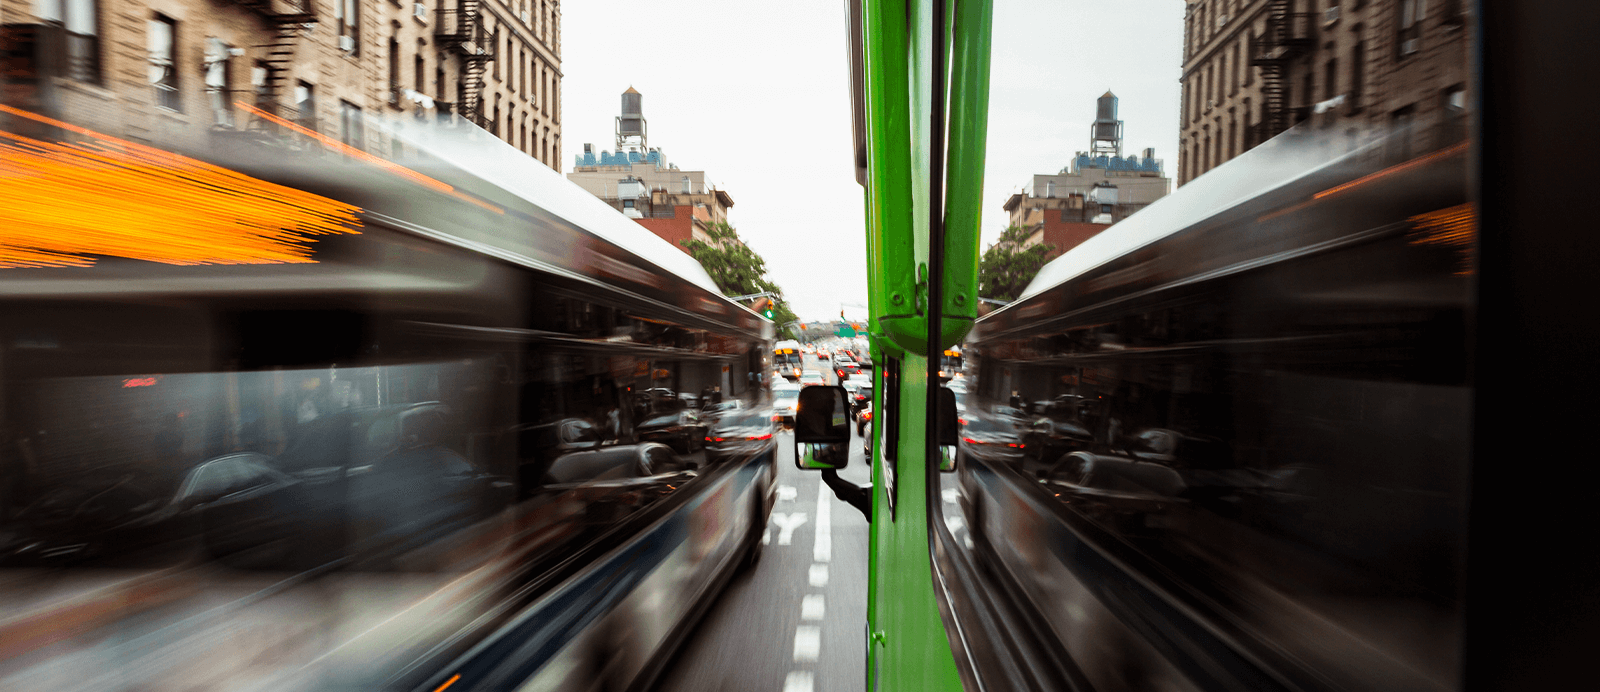 Cars rush by the Roadtrip Nation green RV as it drives down a busy city street.